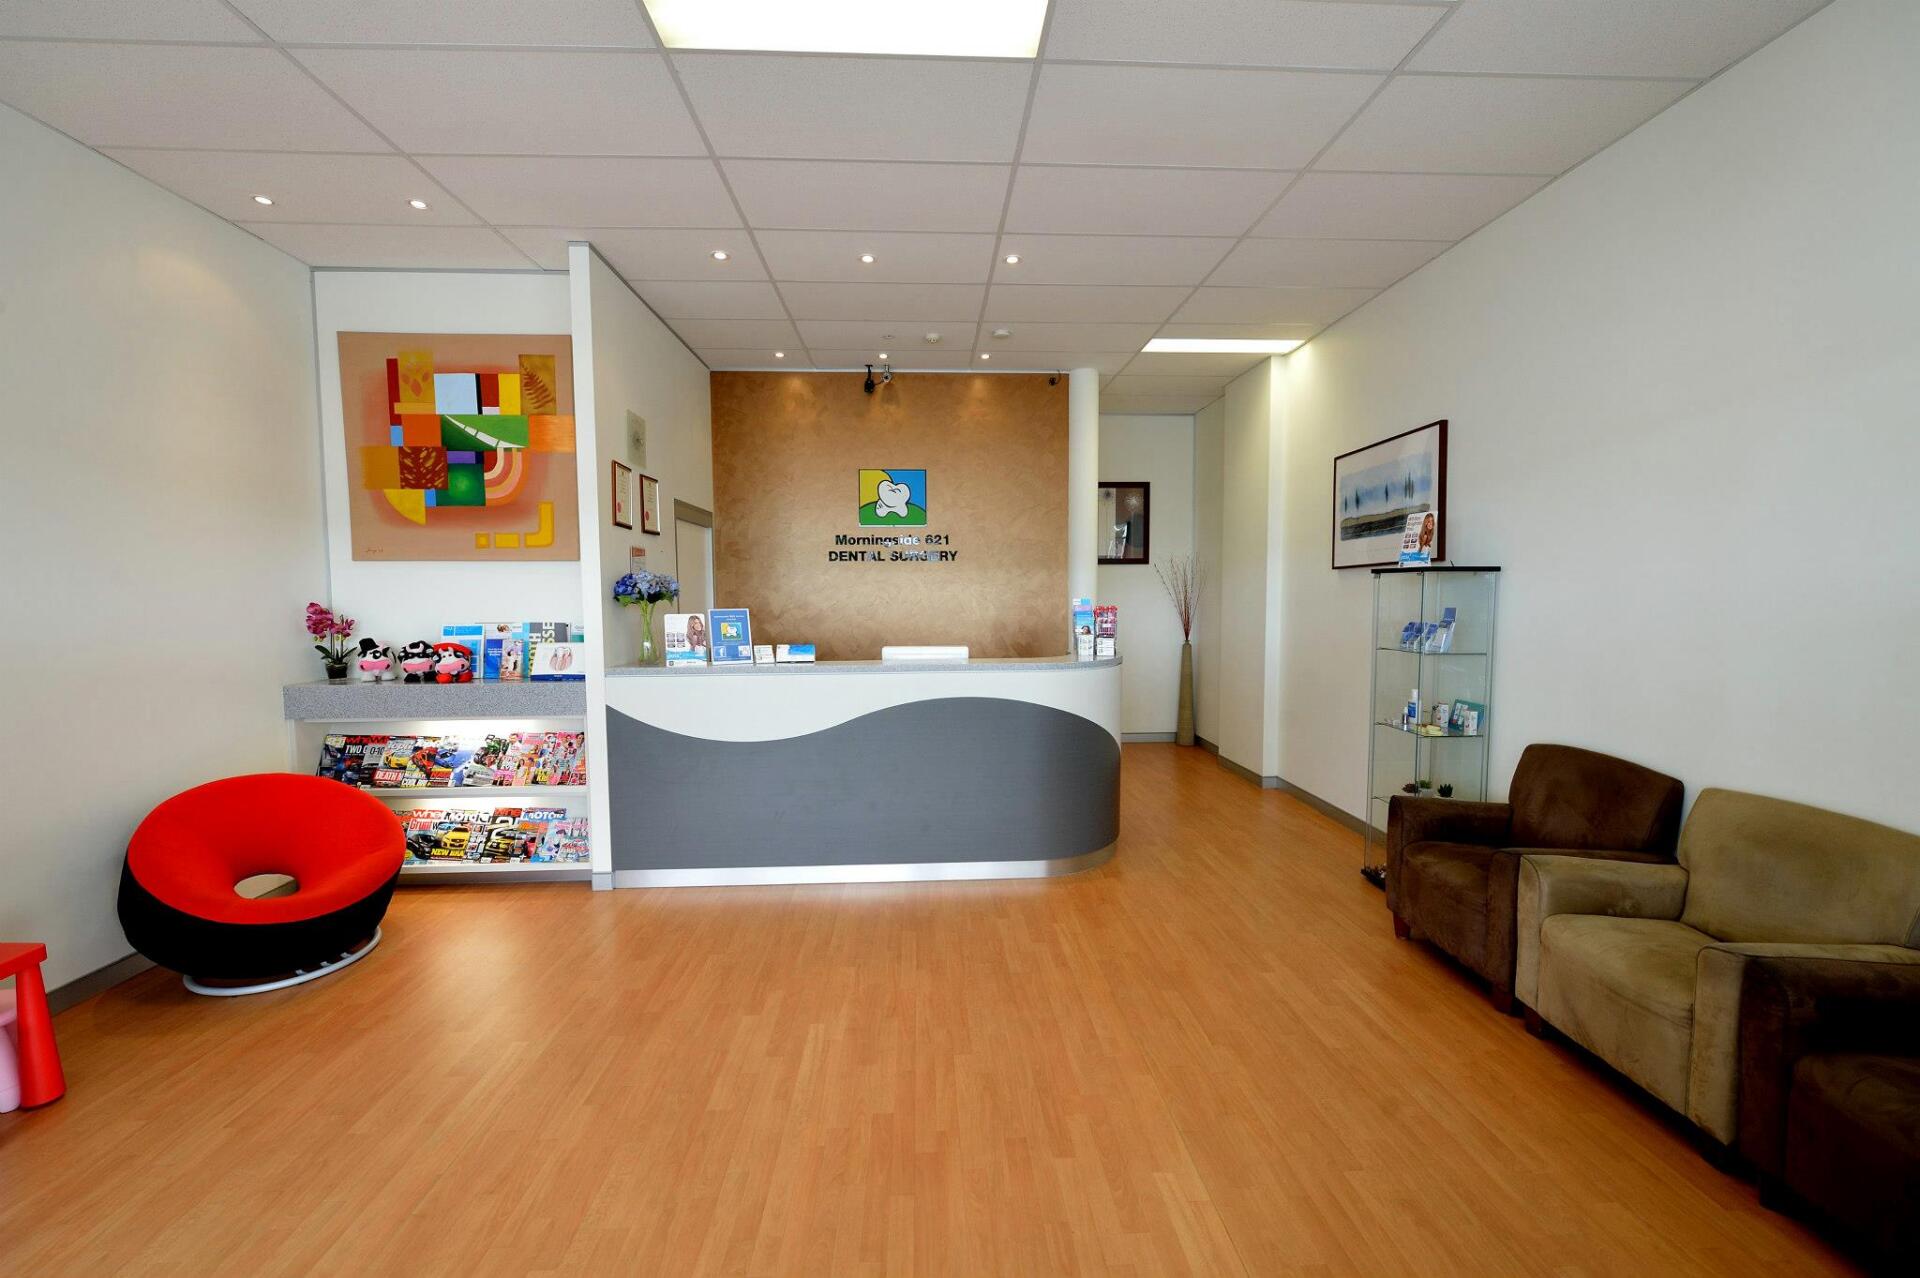 Front View of Dental Clinic — Morningside, QLD — Morningside 621 Dental Surgery